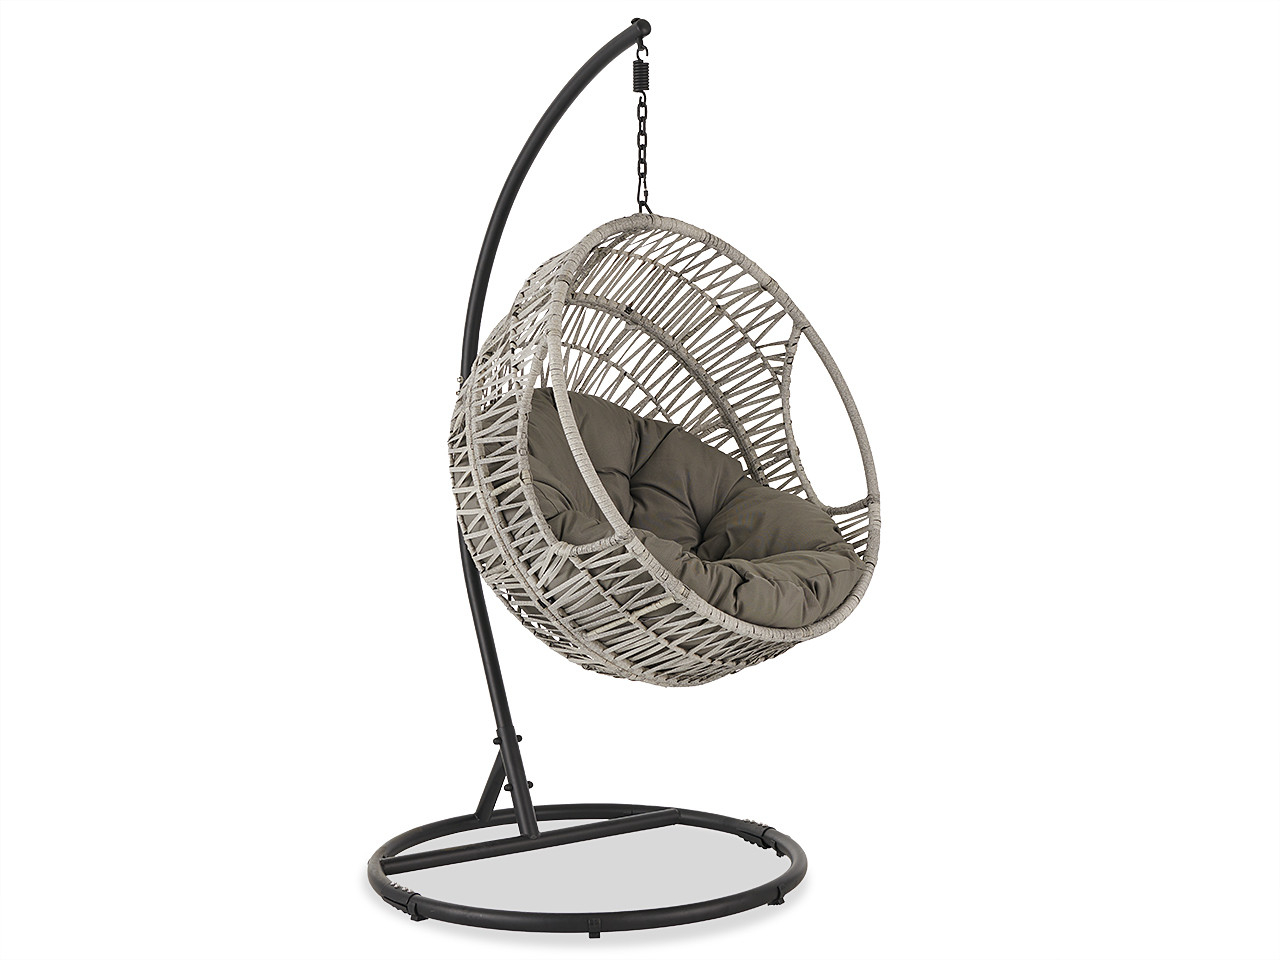 Santal Olive Grey Outdoor Wicker with Grey Cushion Cocoon Hanging Swing Chair